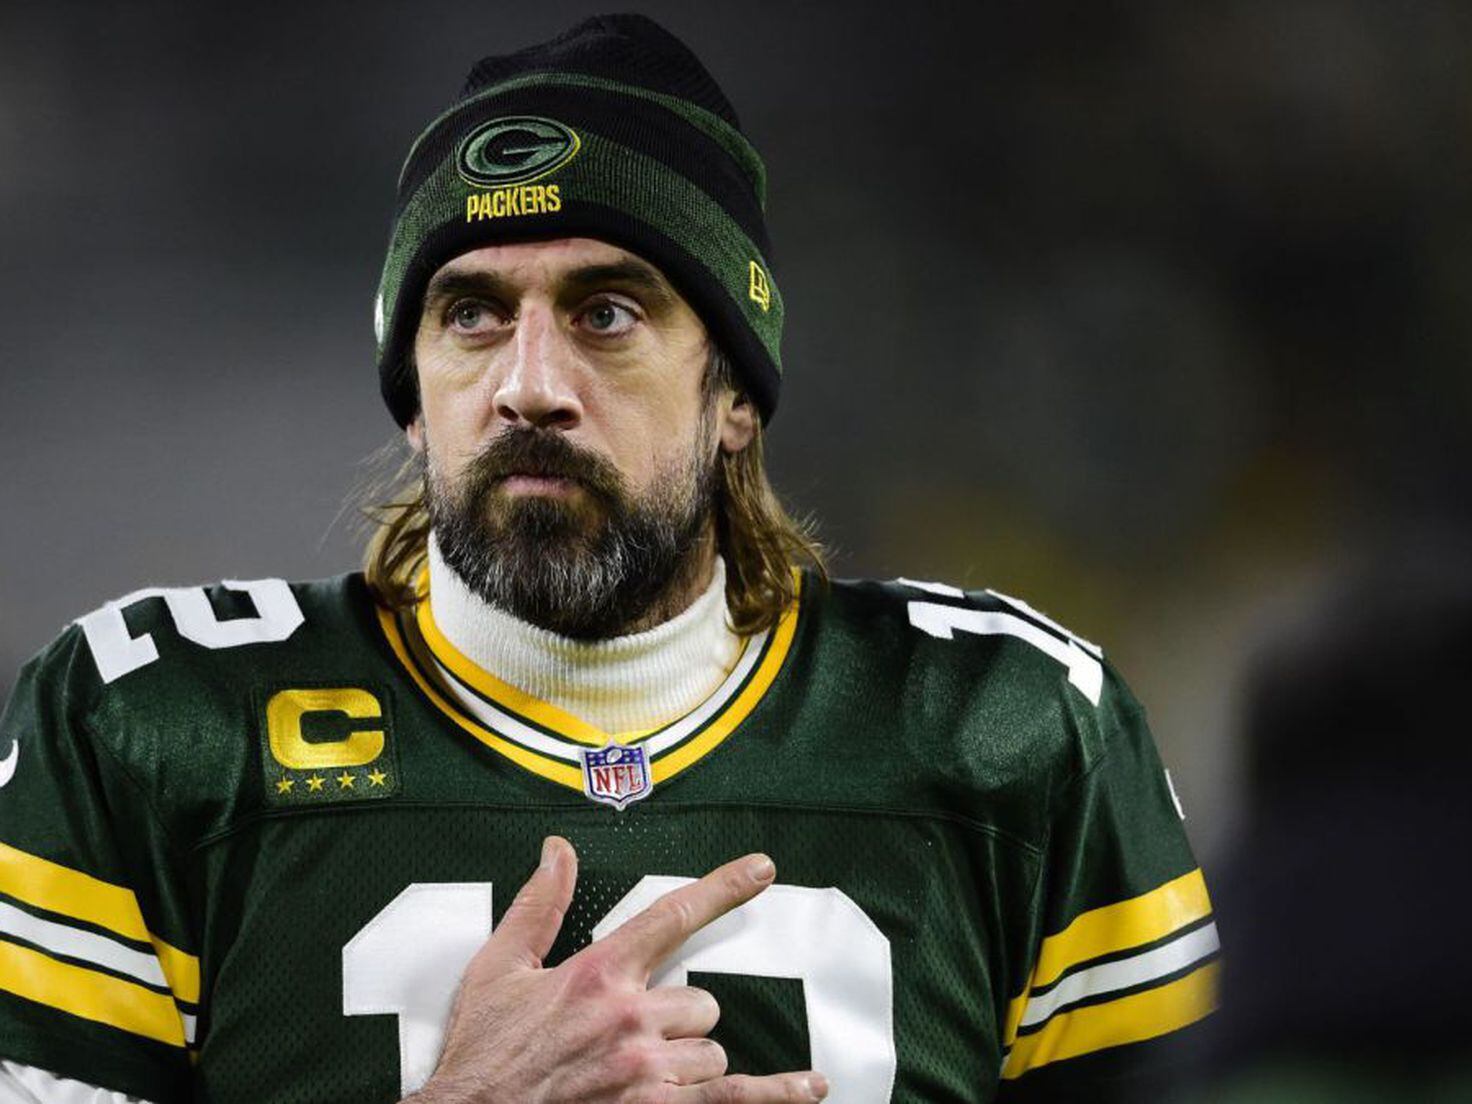 Aaron Rodgers not worried about retribution for 'I own you' comments